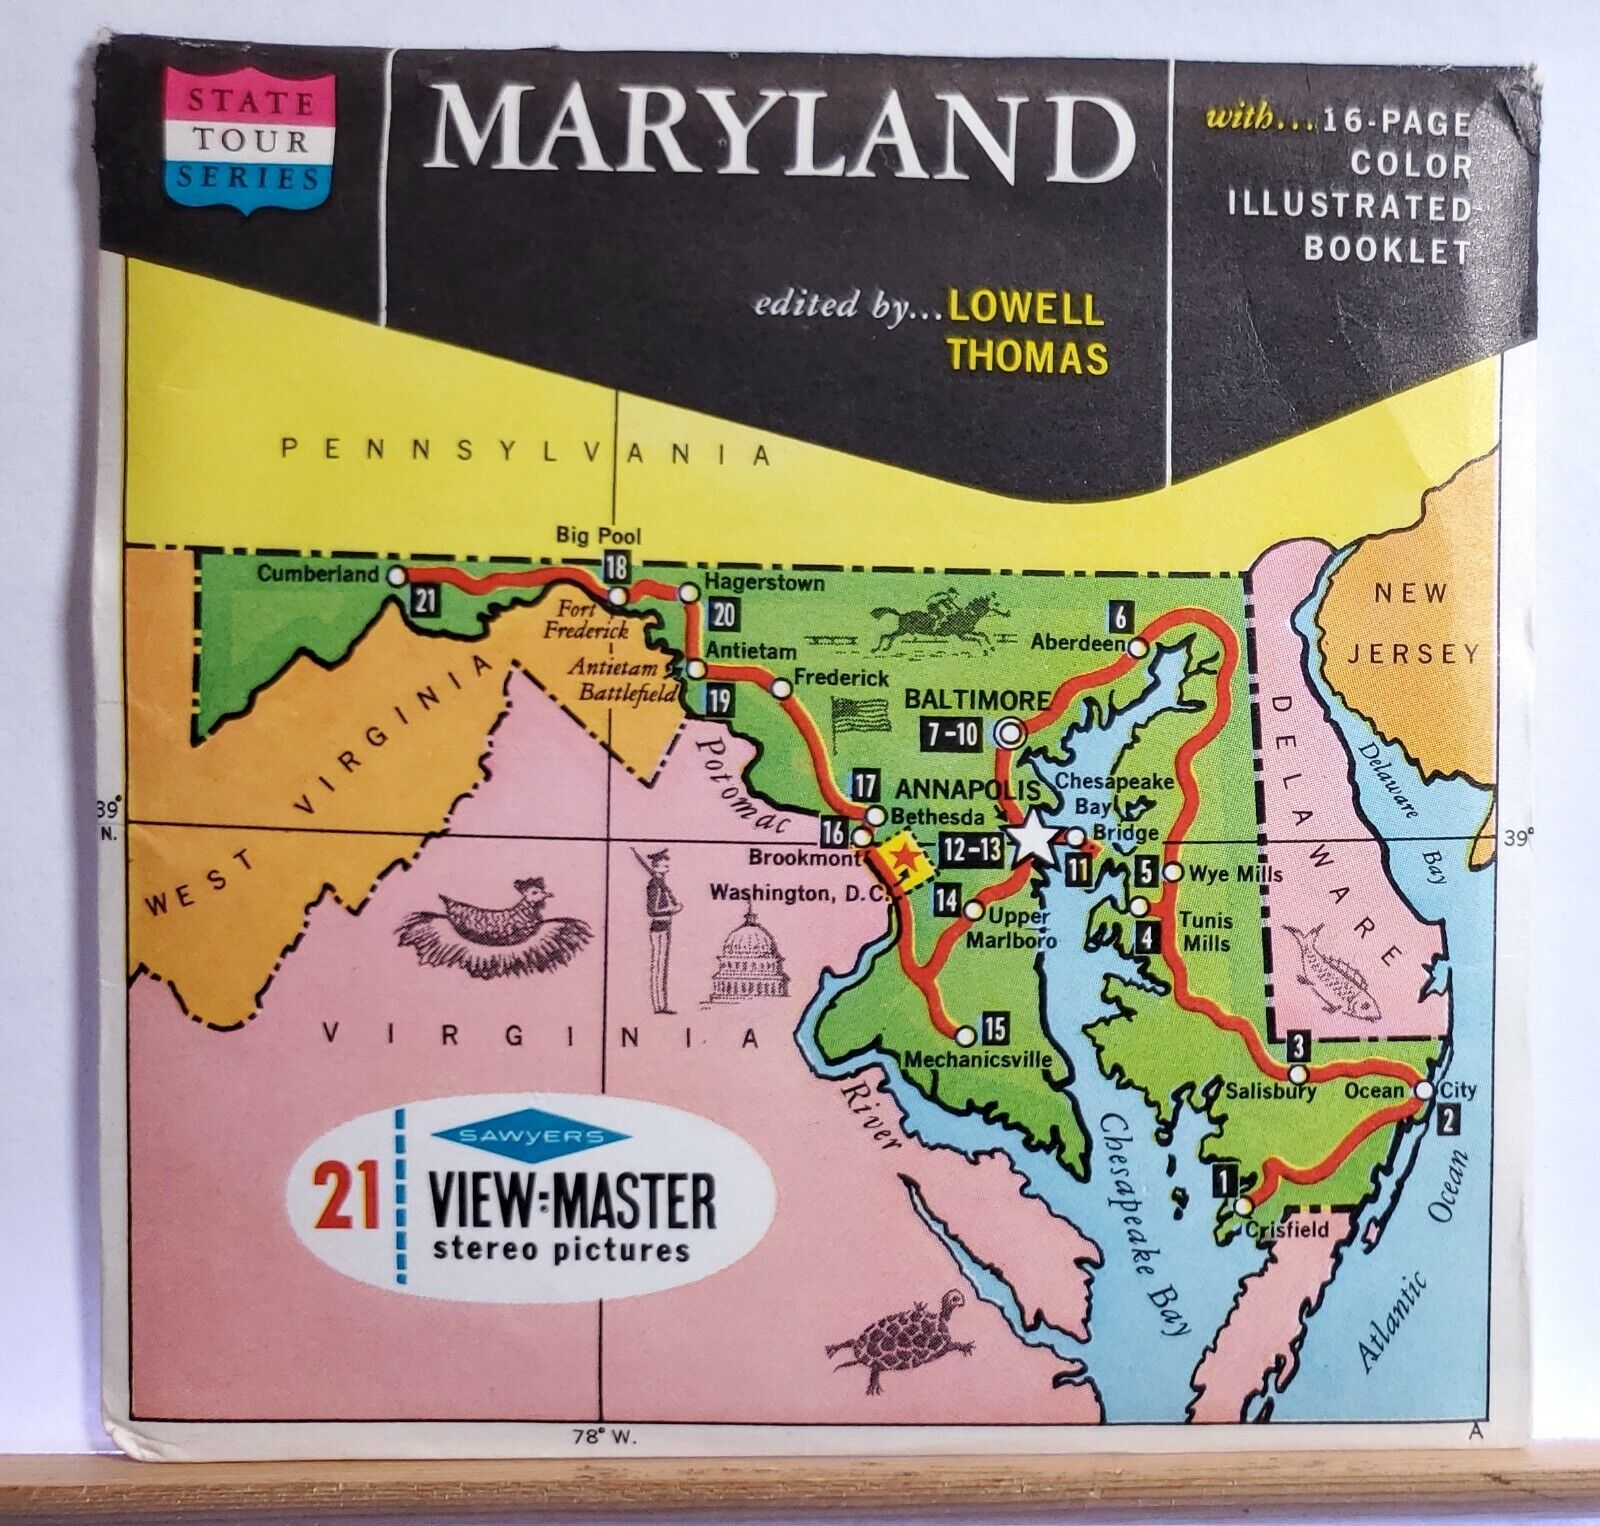 Maryland State Tour 3-reel Set A780 - Sawyers S6b ed. A View-Master Map Packet